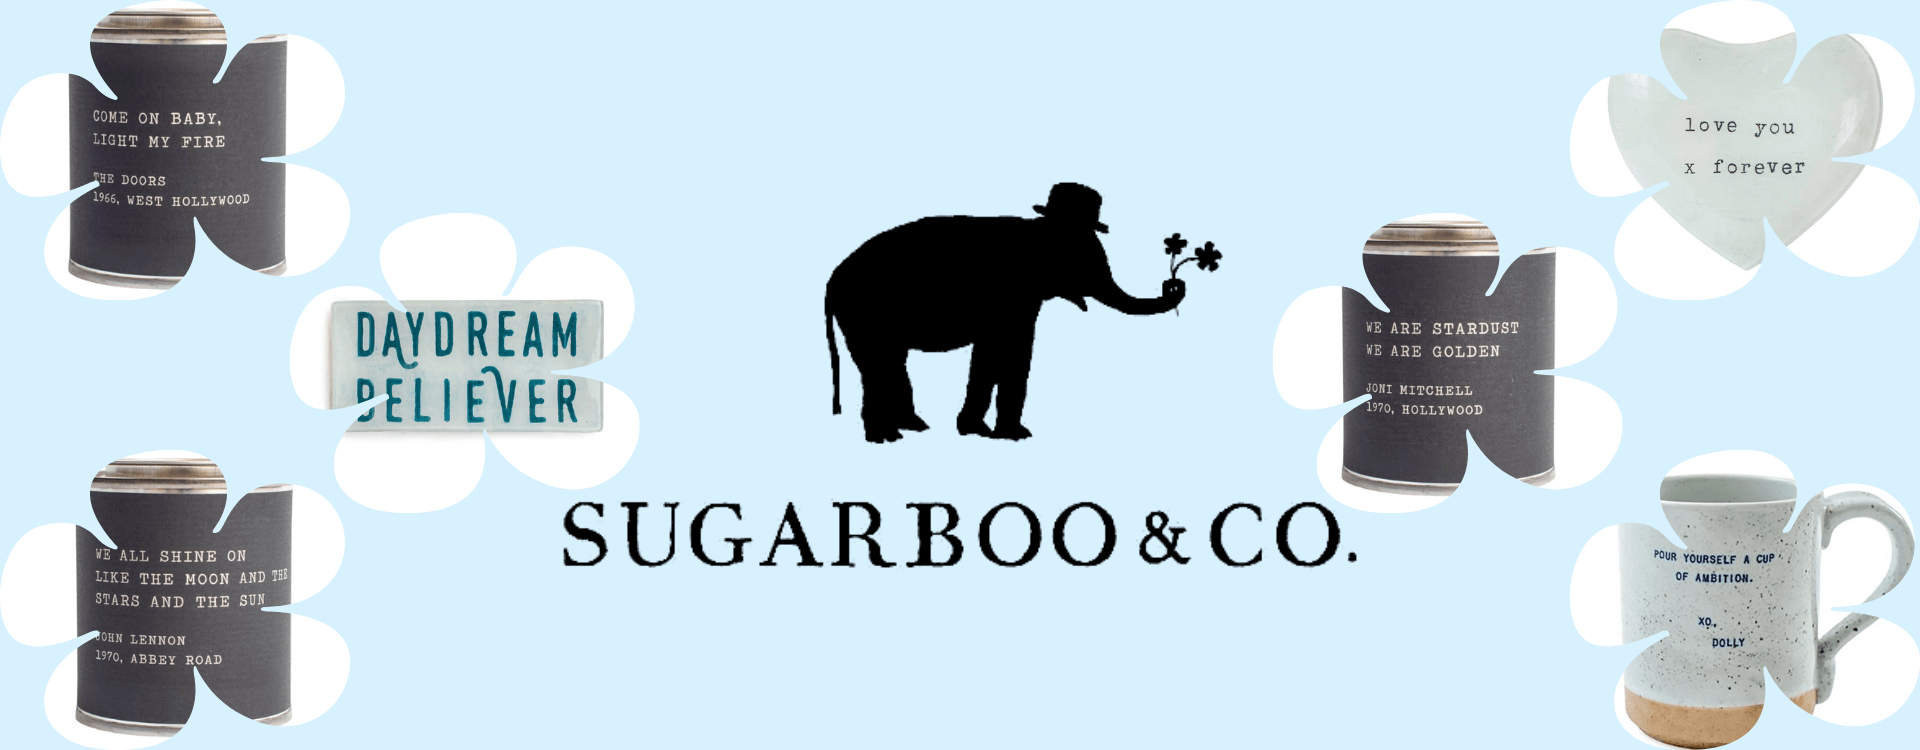 SUGARBOO & CO Gifts